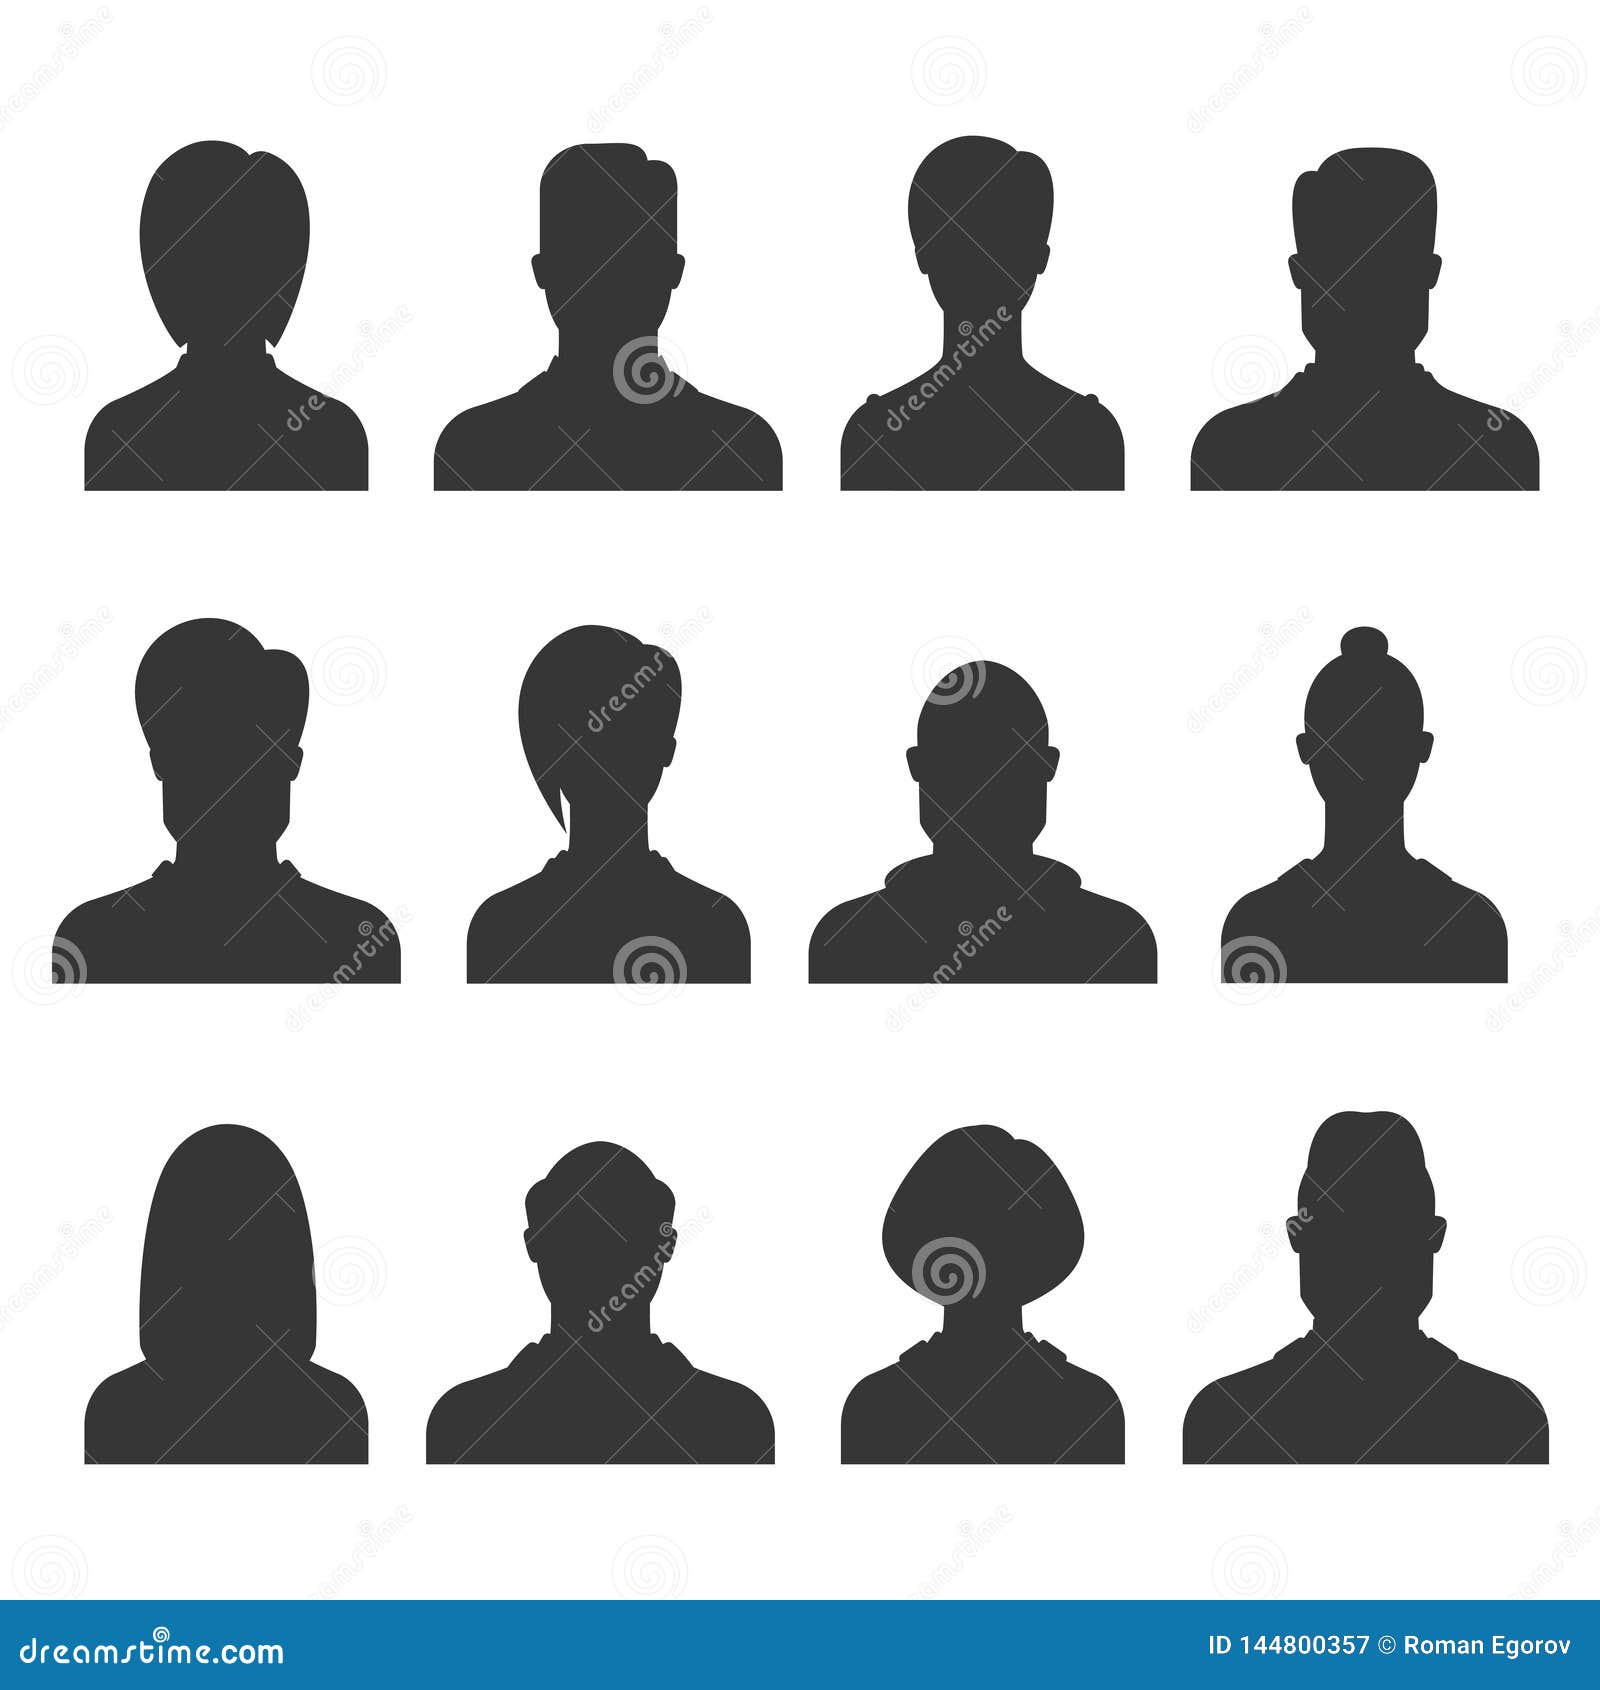 silhouette avatar set. person avatars office professional profiles anonymous heads female male faces portraits 